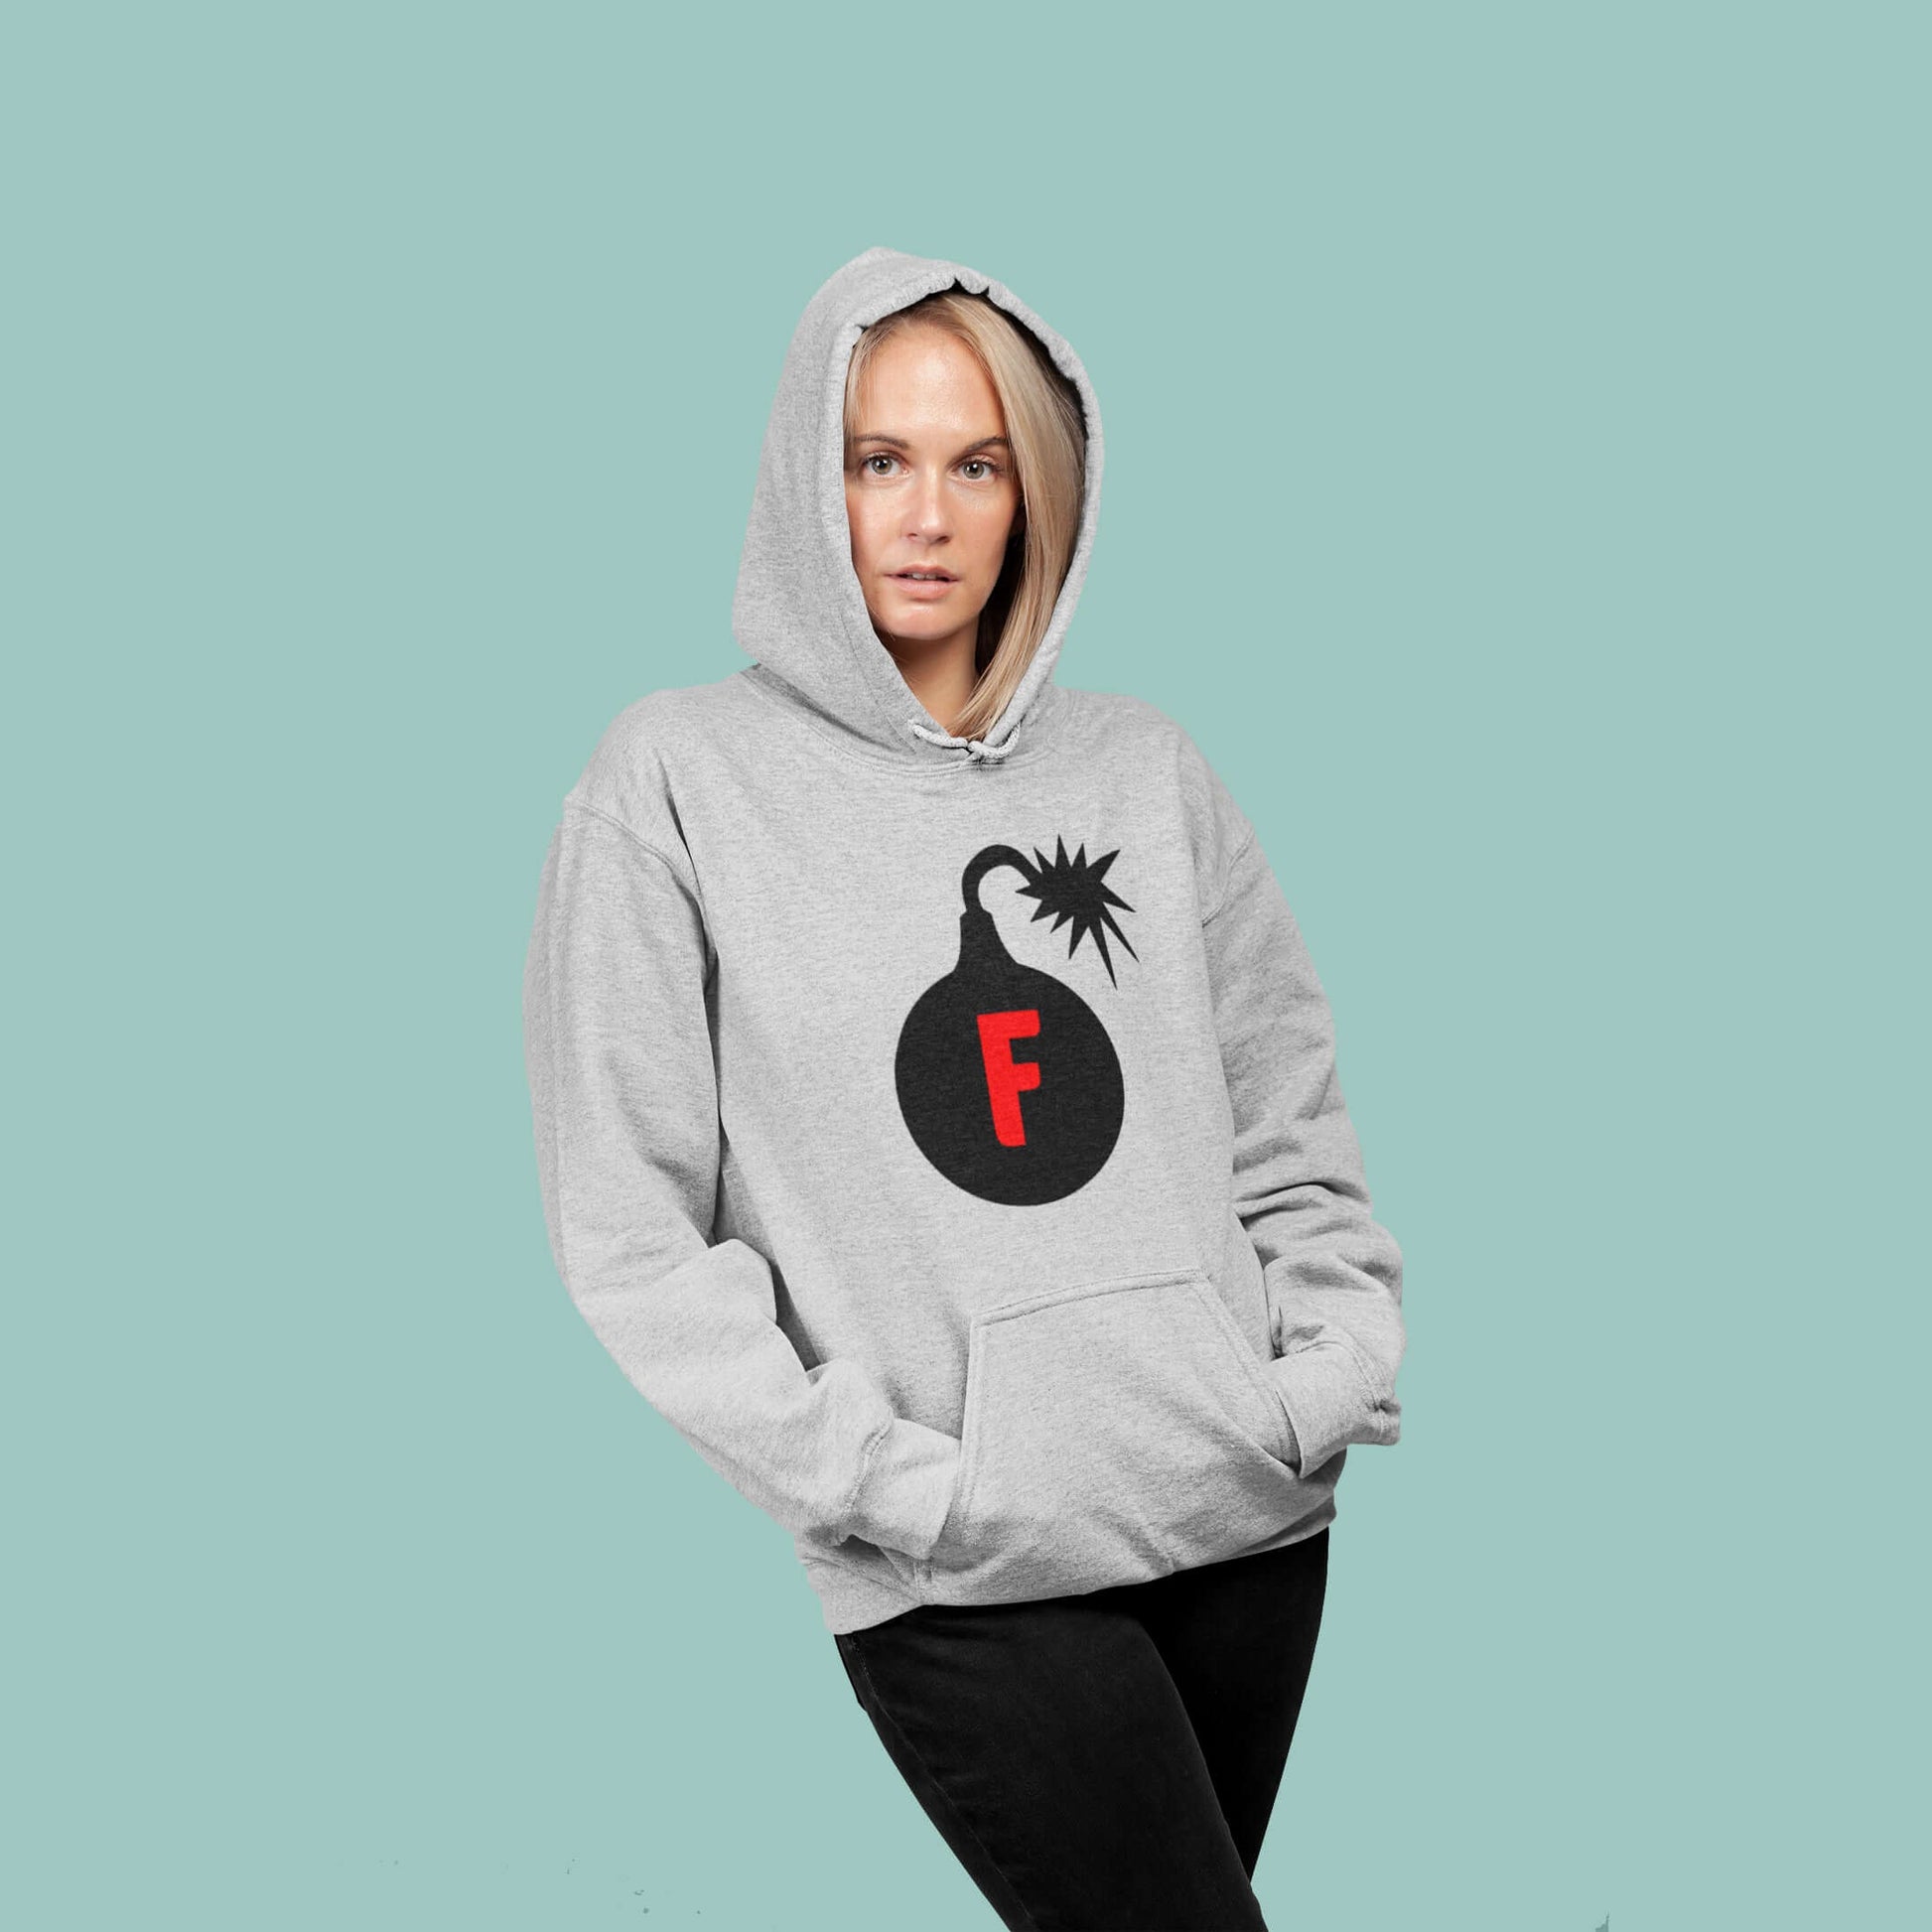 Woman wearing a light grey hoodie sweatshirt with an image of a bomb & the letter F printed in the center. The graphics are printed on the front of the hoodie.